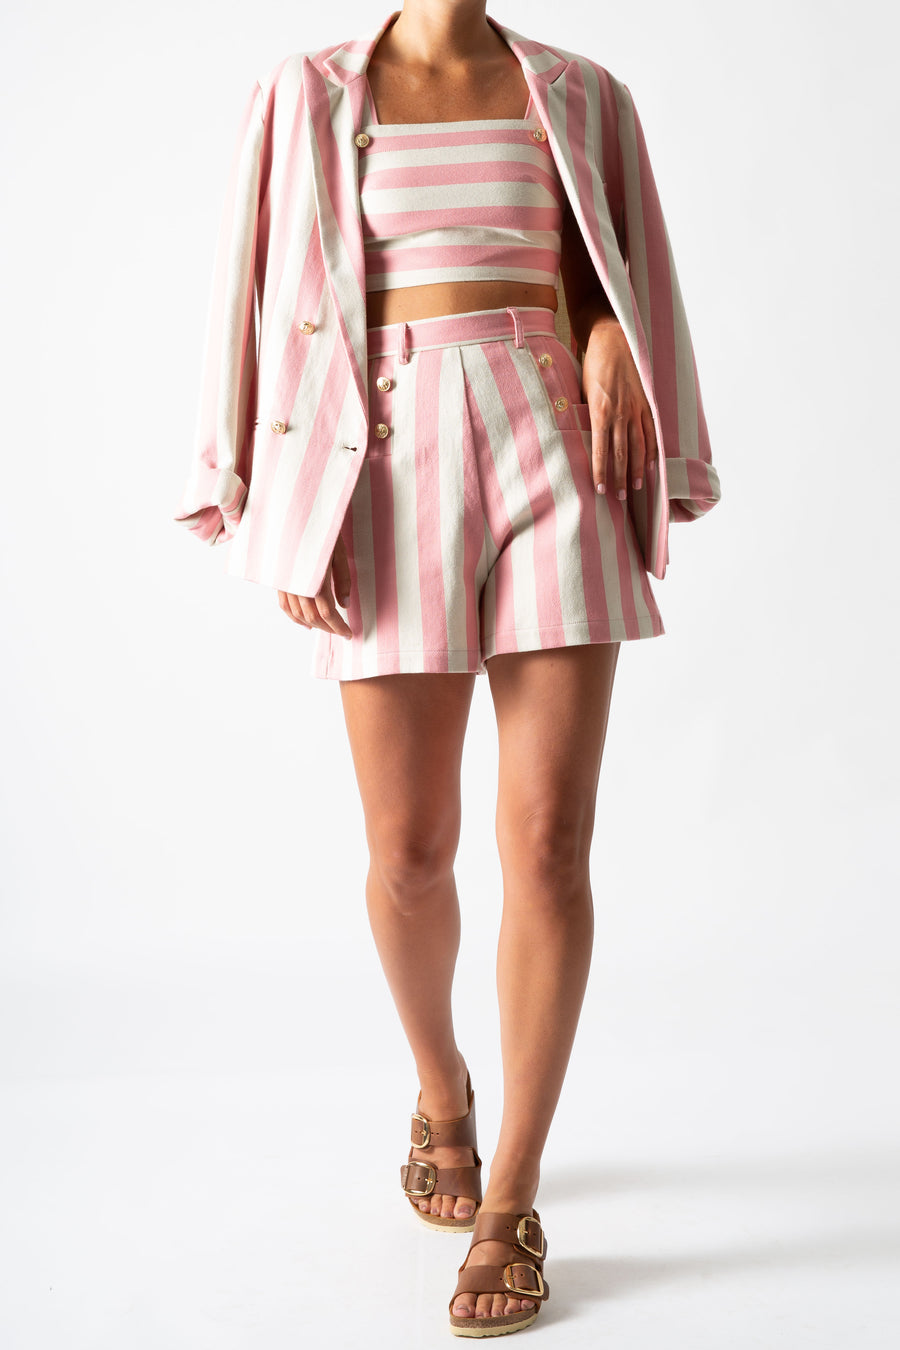 This is a photo of a woman wearing a 3 piece suit with shorts, a cropped top, and blazer over her shoulders. The suit is pink and neutral thick stripes with gold buttons.